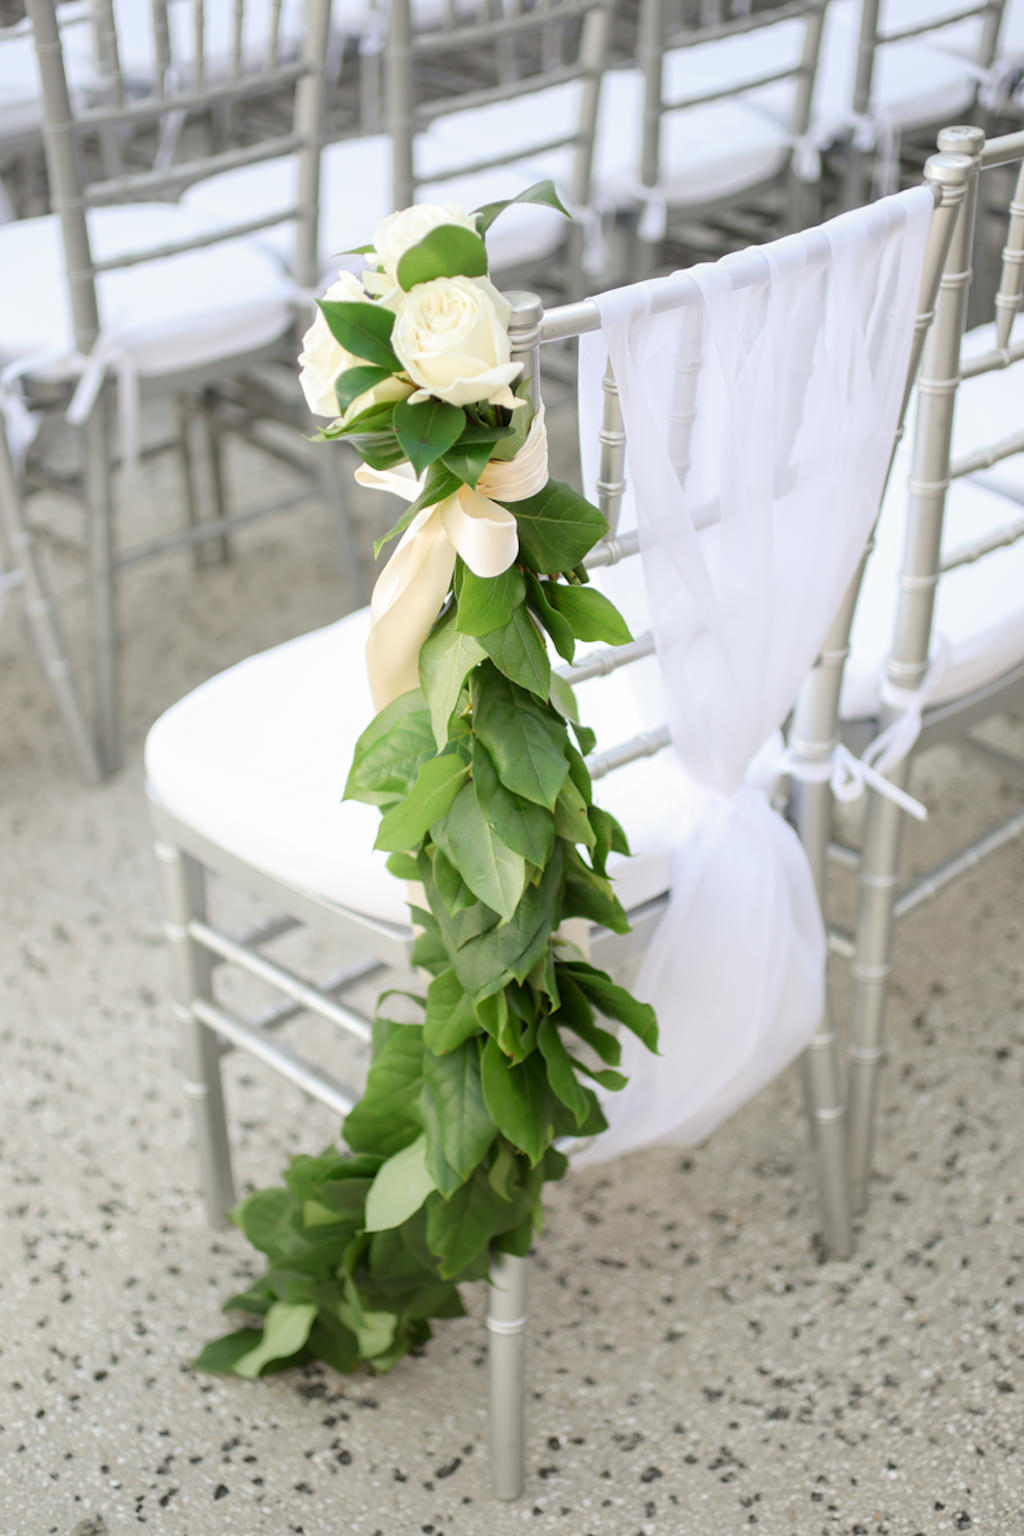 Elegant Rustic Wedding Ceremony Decor, Silver Chiavari Chairs with White Sash and Greenery Leaf Garland and Ivory Roses | Wedding Photographer Lifelong Photography Studios | Wedding Planner Kelly Kennedy Weddings and Events